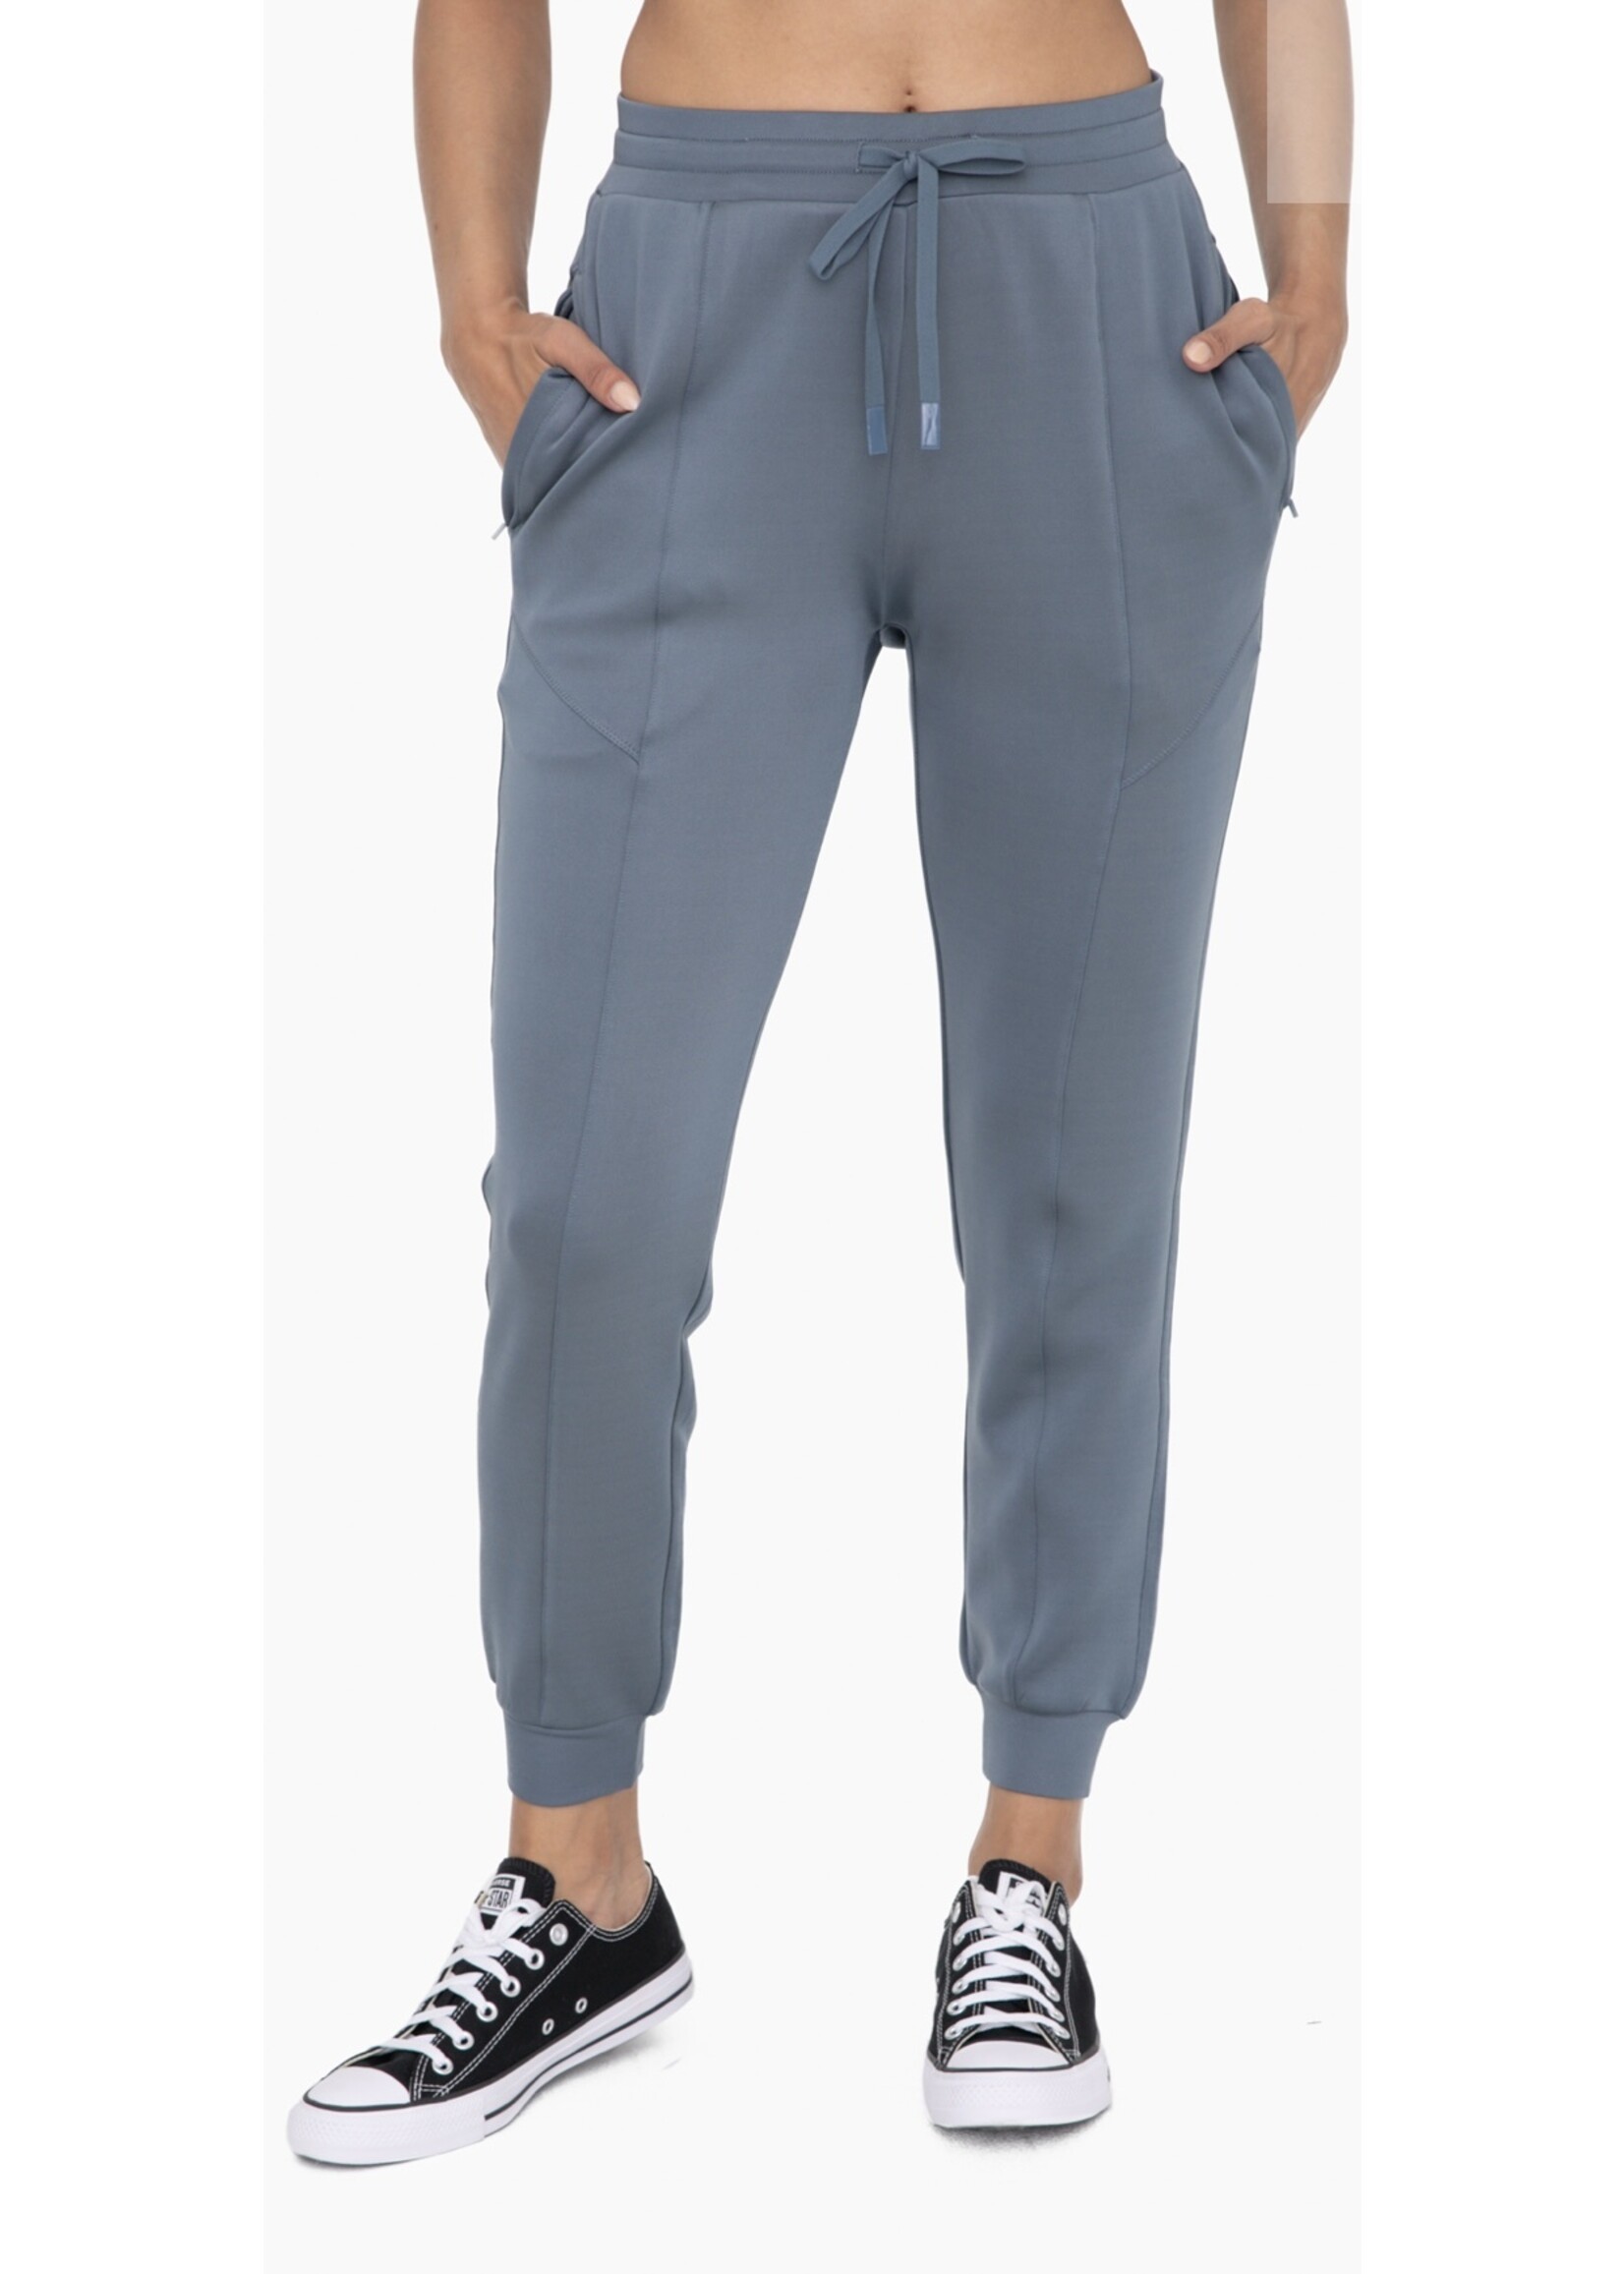 CUFFED JOGGERS WITH ZIPPERRED POCKETS